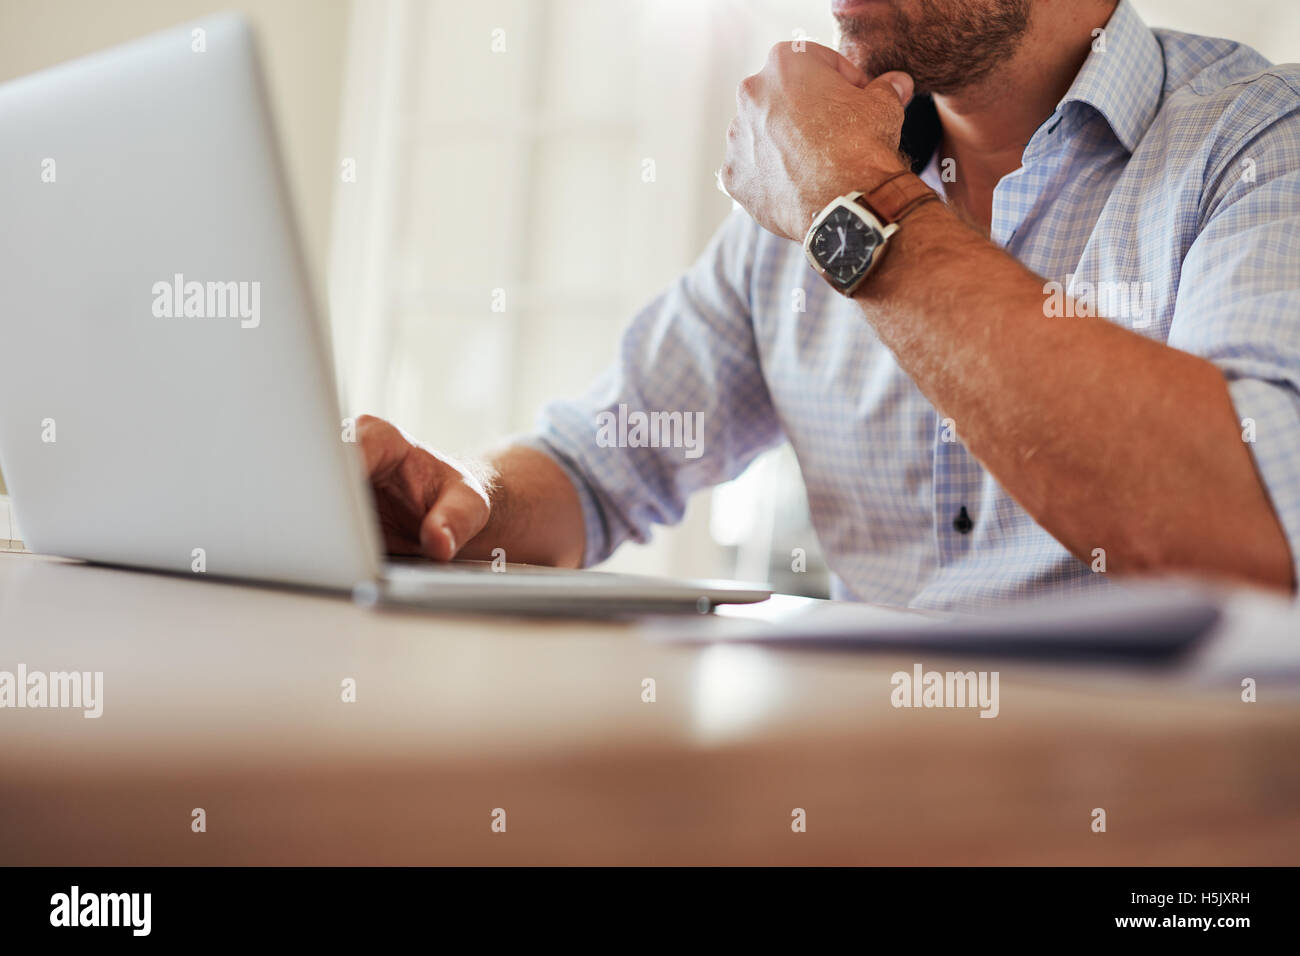 Close up shot of young man sitting at table and working on laptop. Businessman working from home. Stock Photo